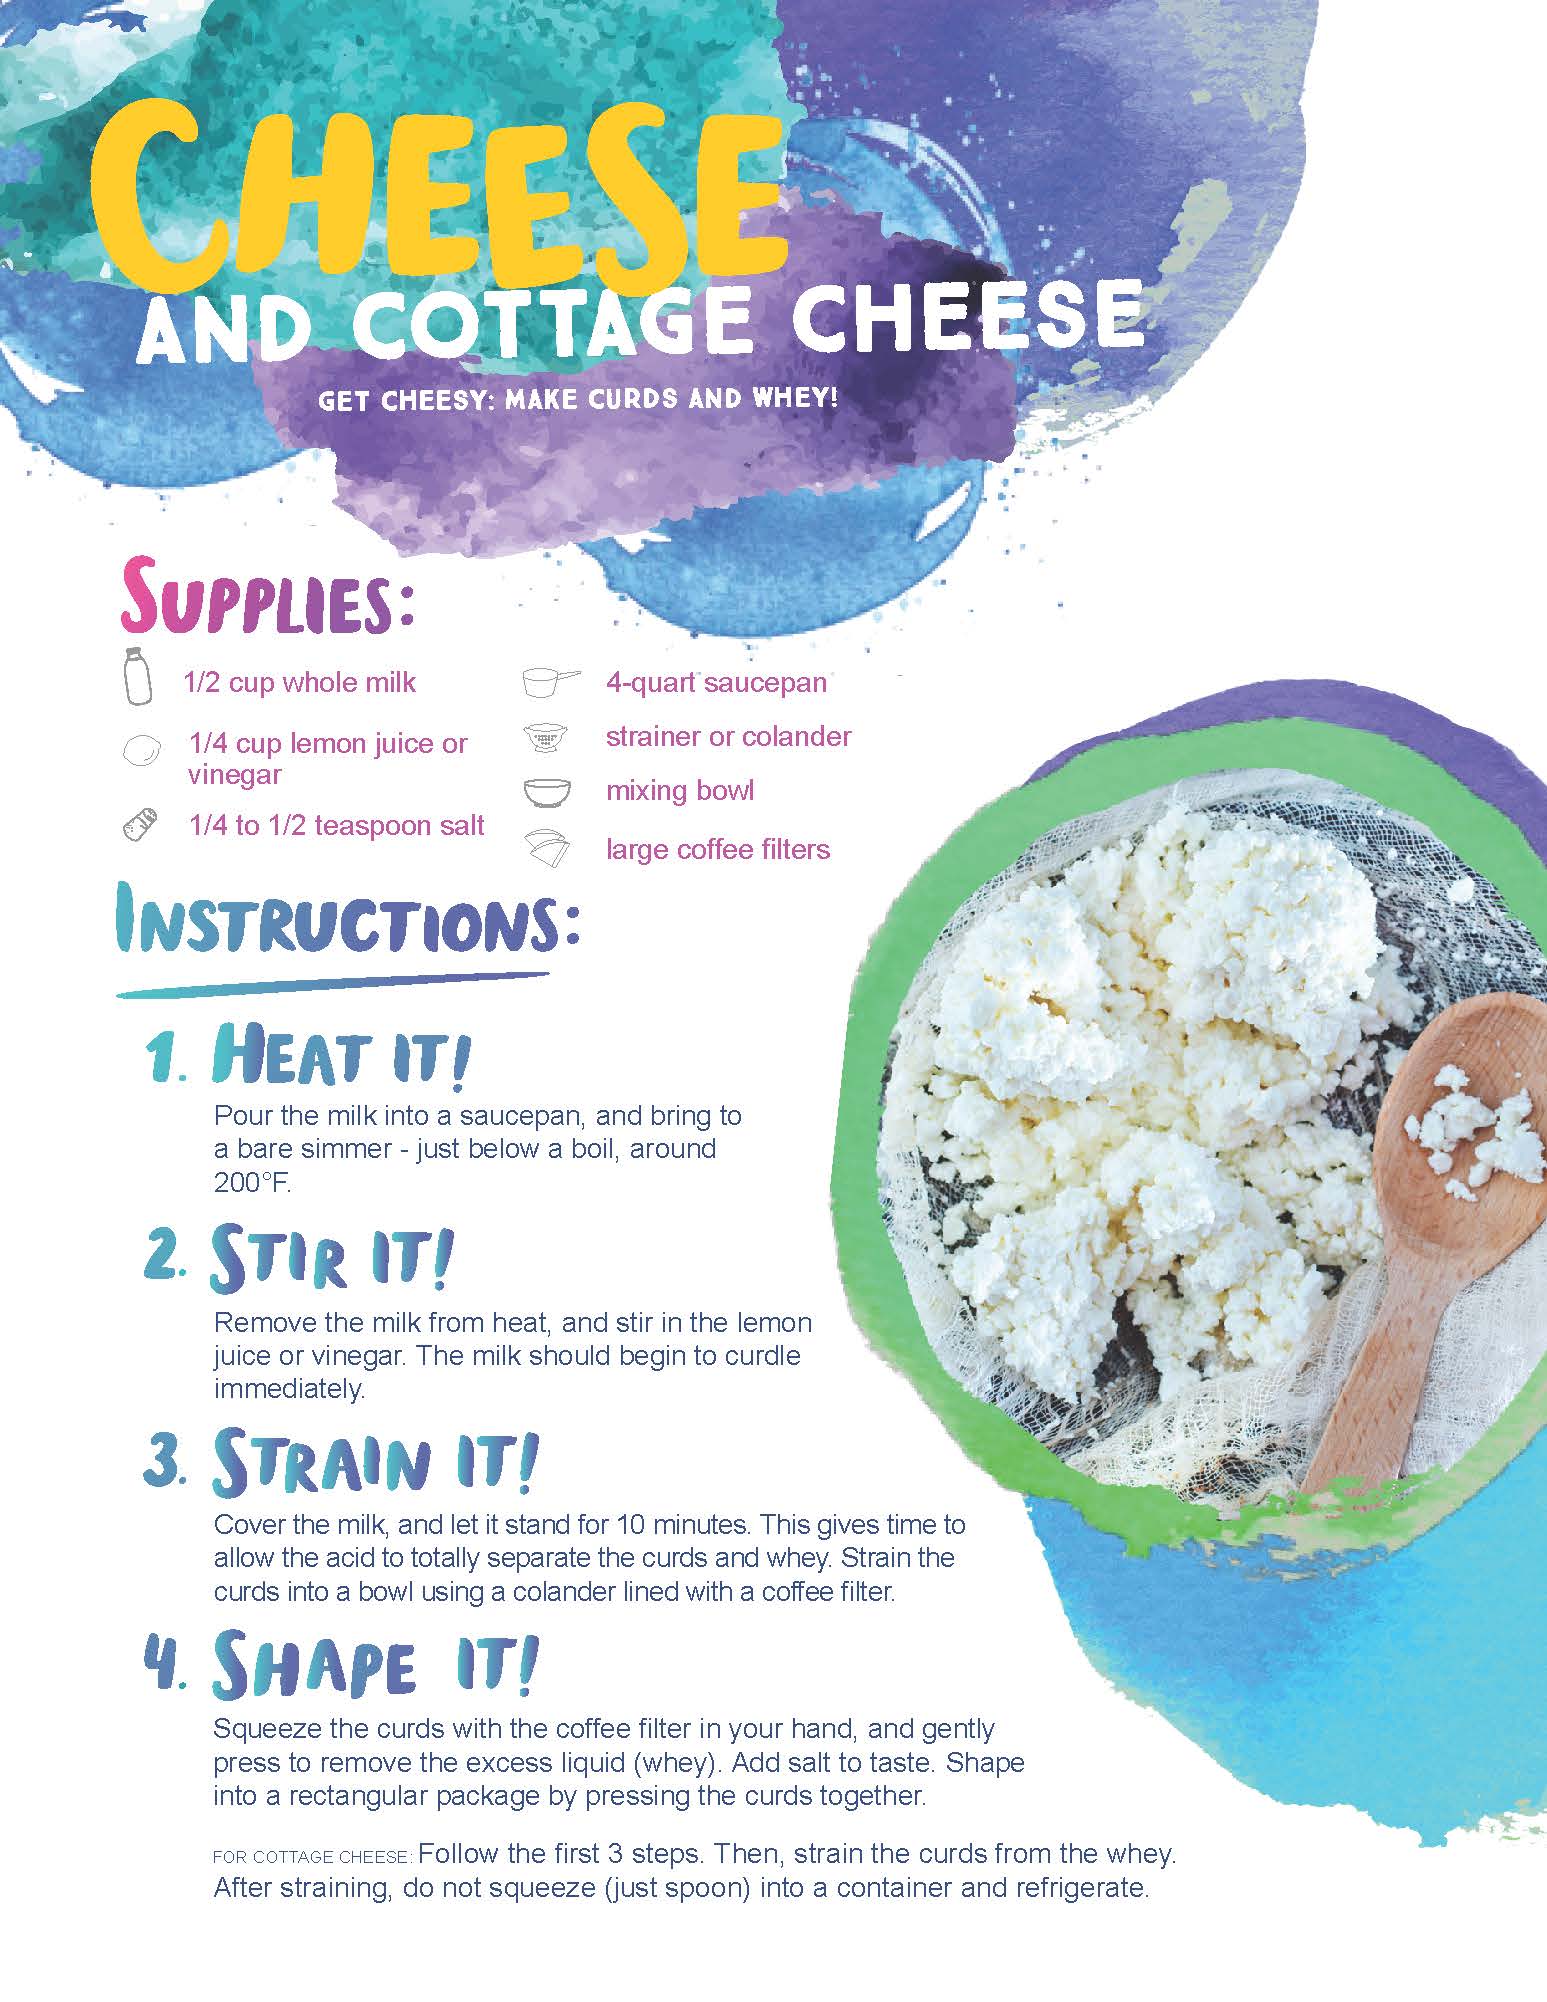 How to Make Cheese and Cottage Cheese image